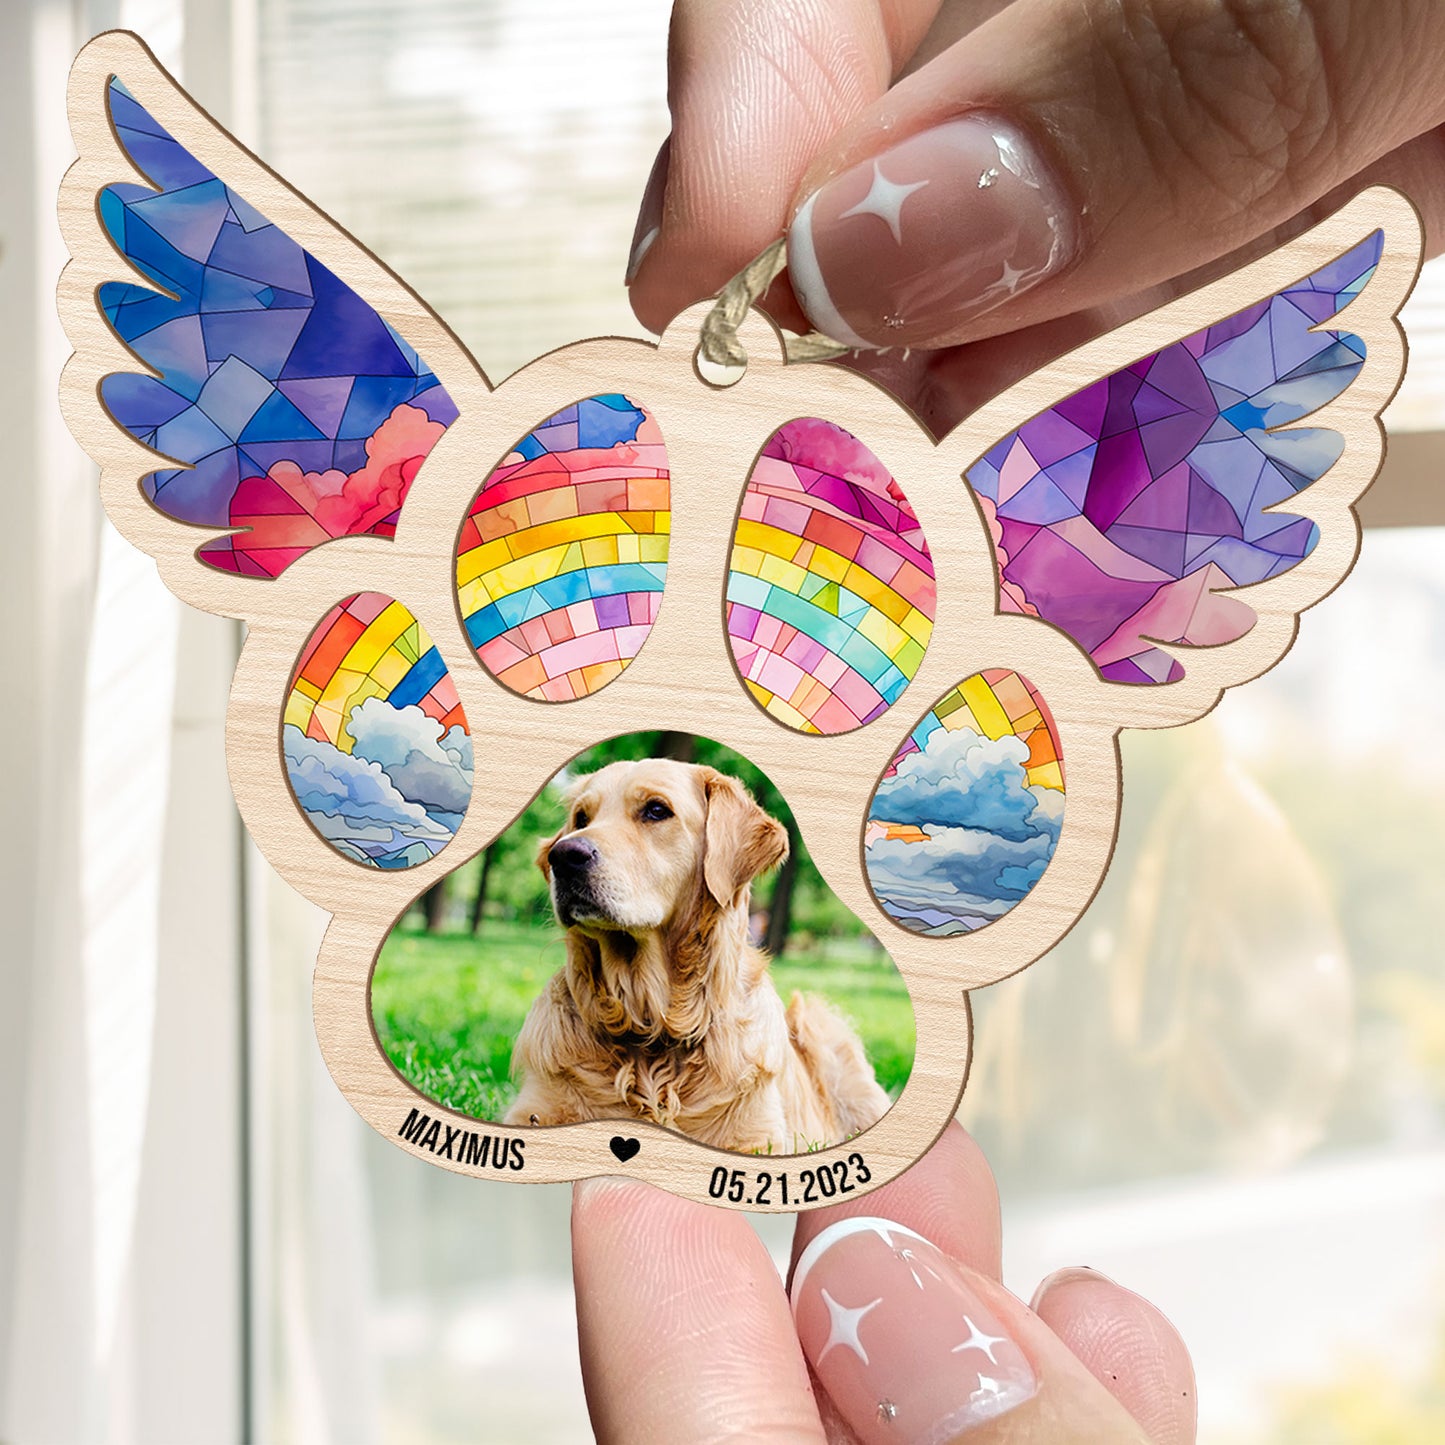 Pawprints On Hearts - Personalized Suncatcher Photo Ornament (Insert Included)